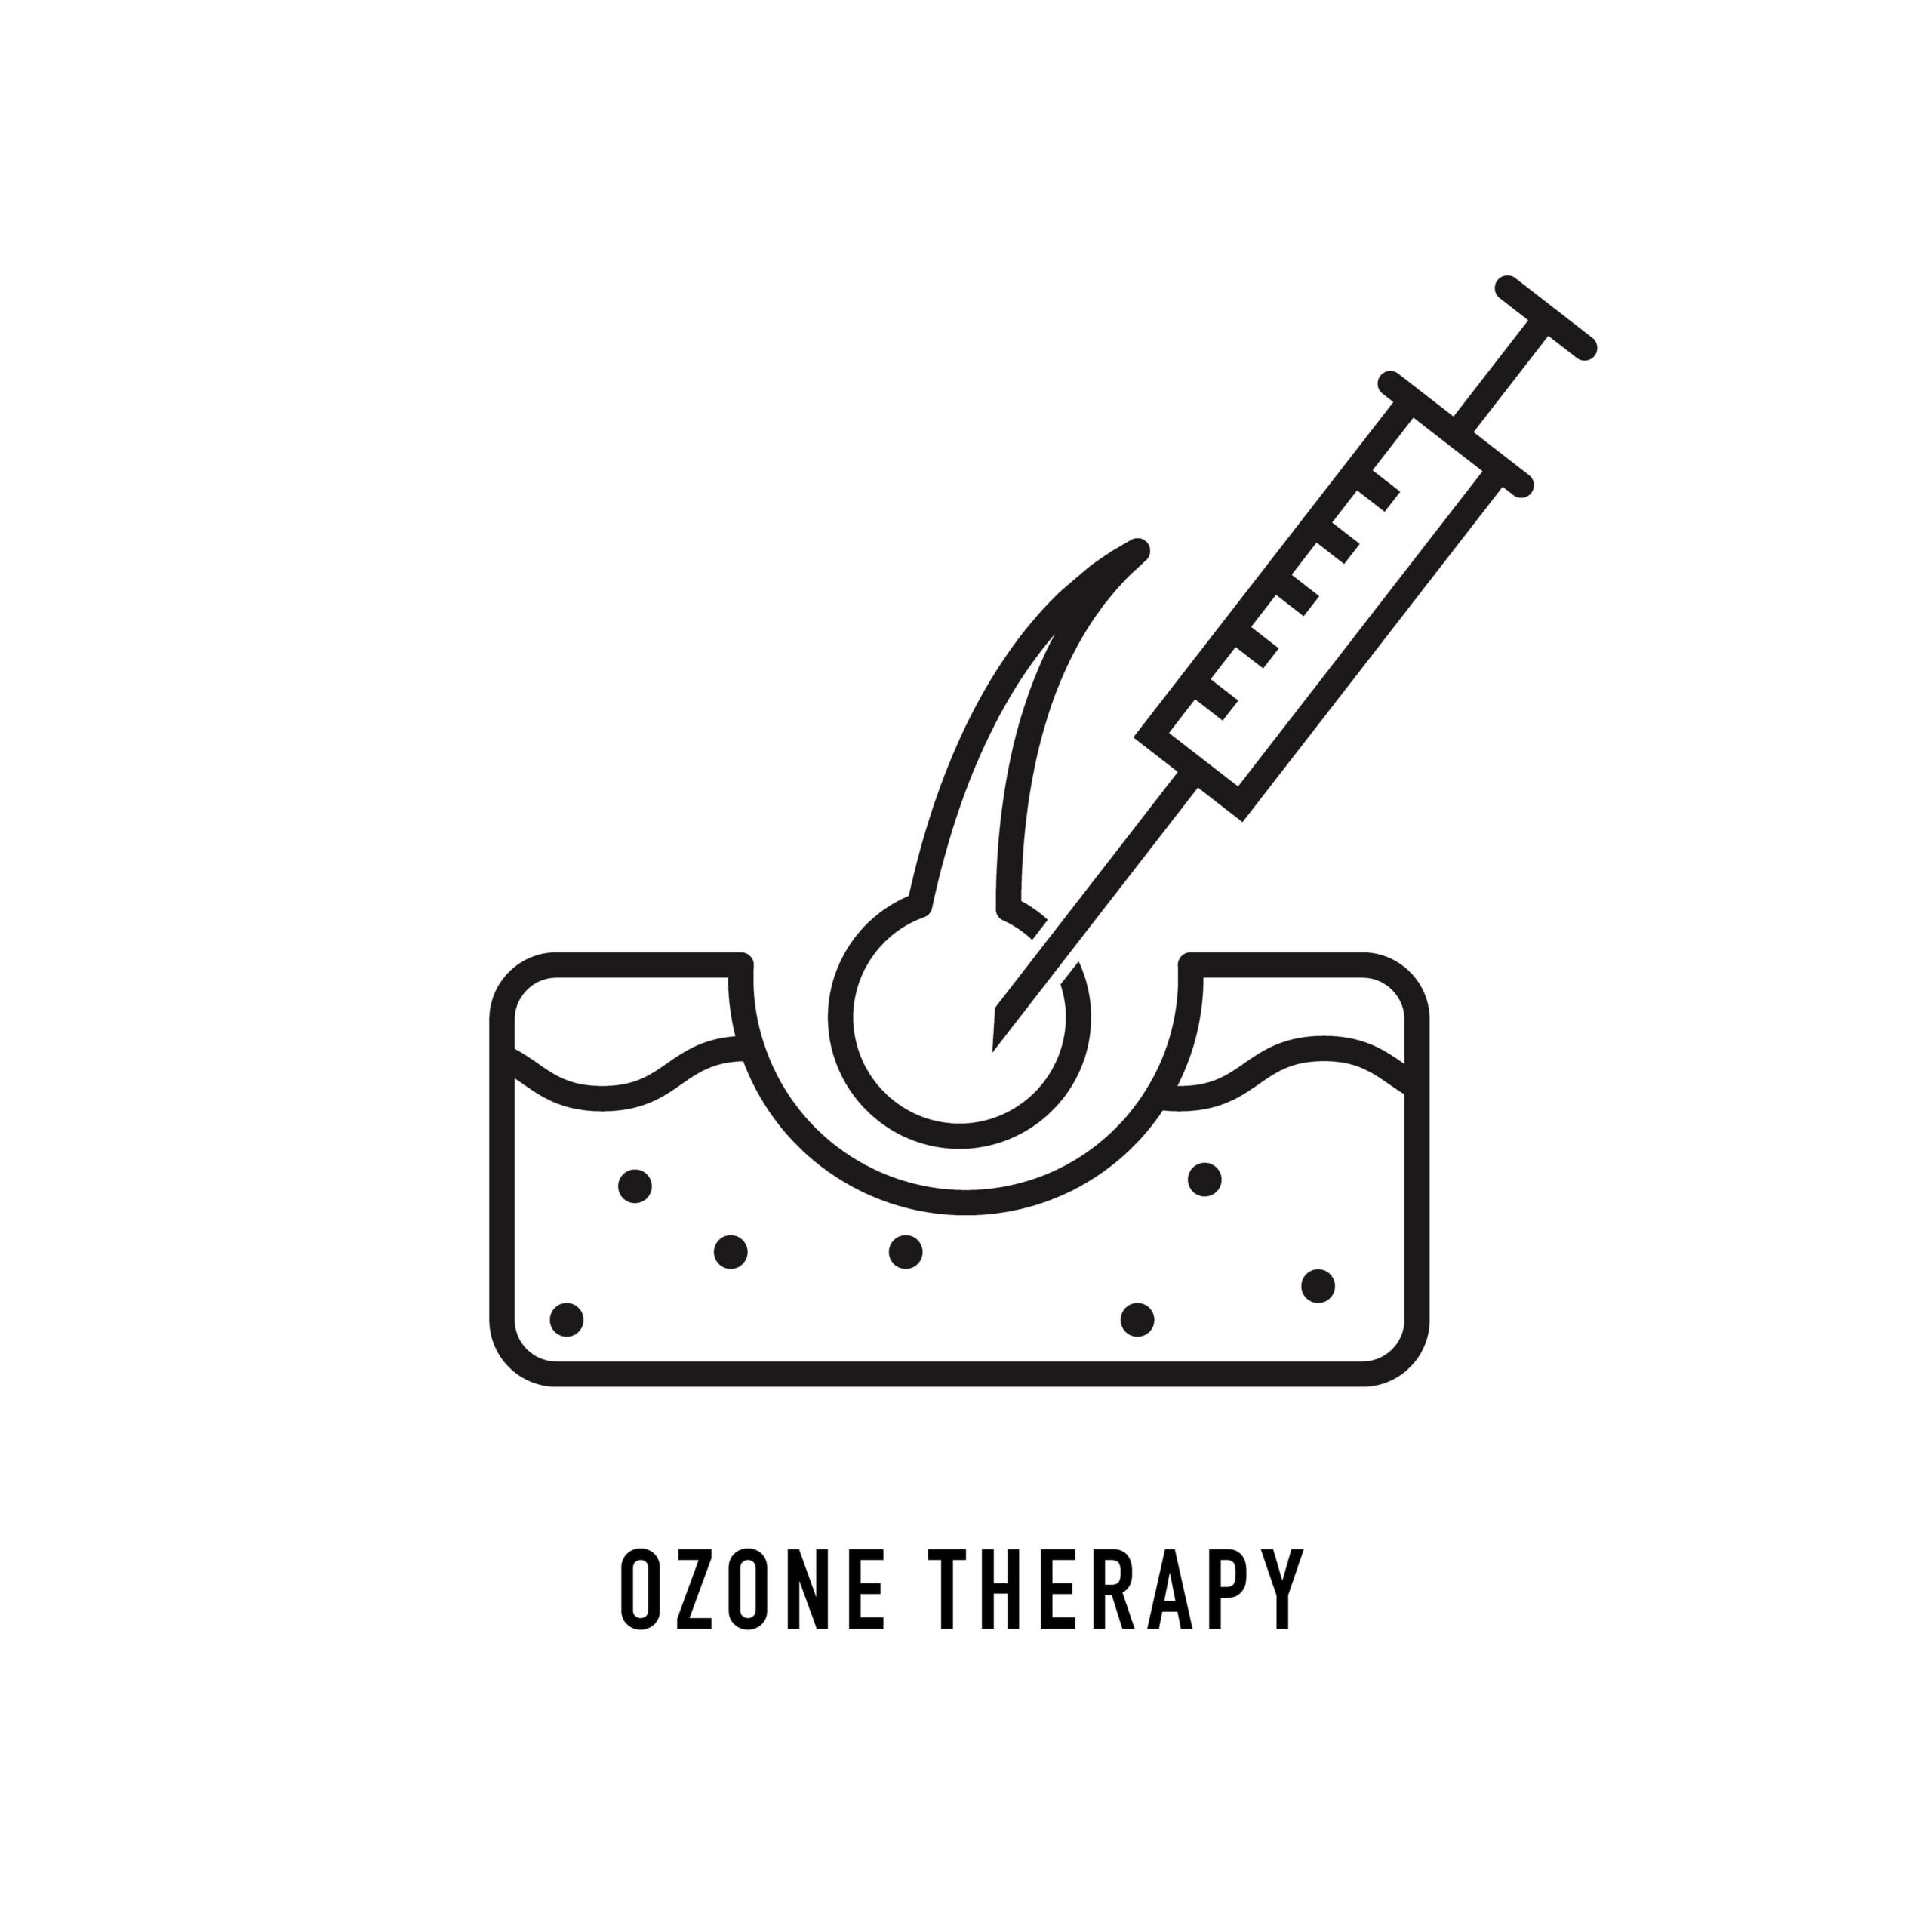 How Does Ozone Therapy Work?